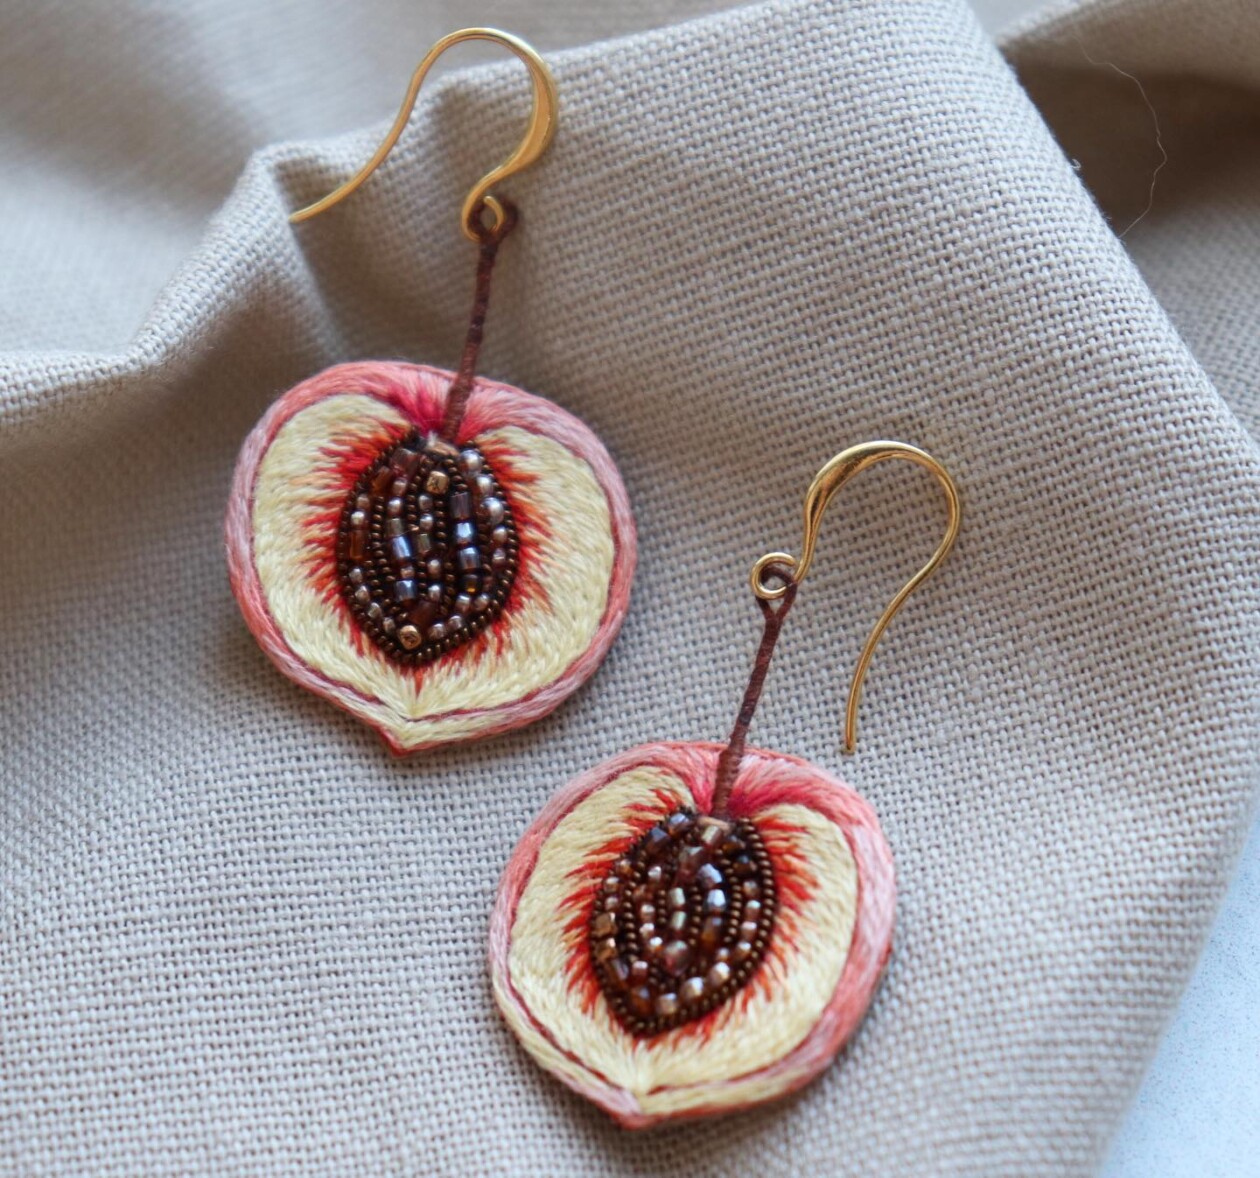 Eye Catching Handmade Embroidered Earrings By Vivaembr (13)